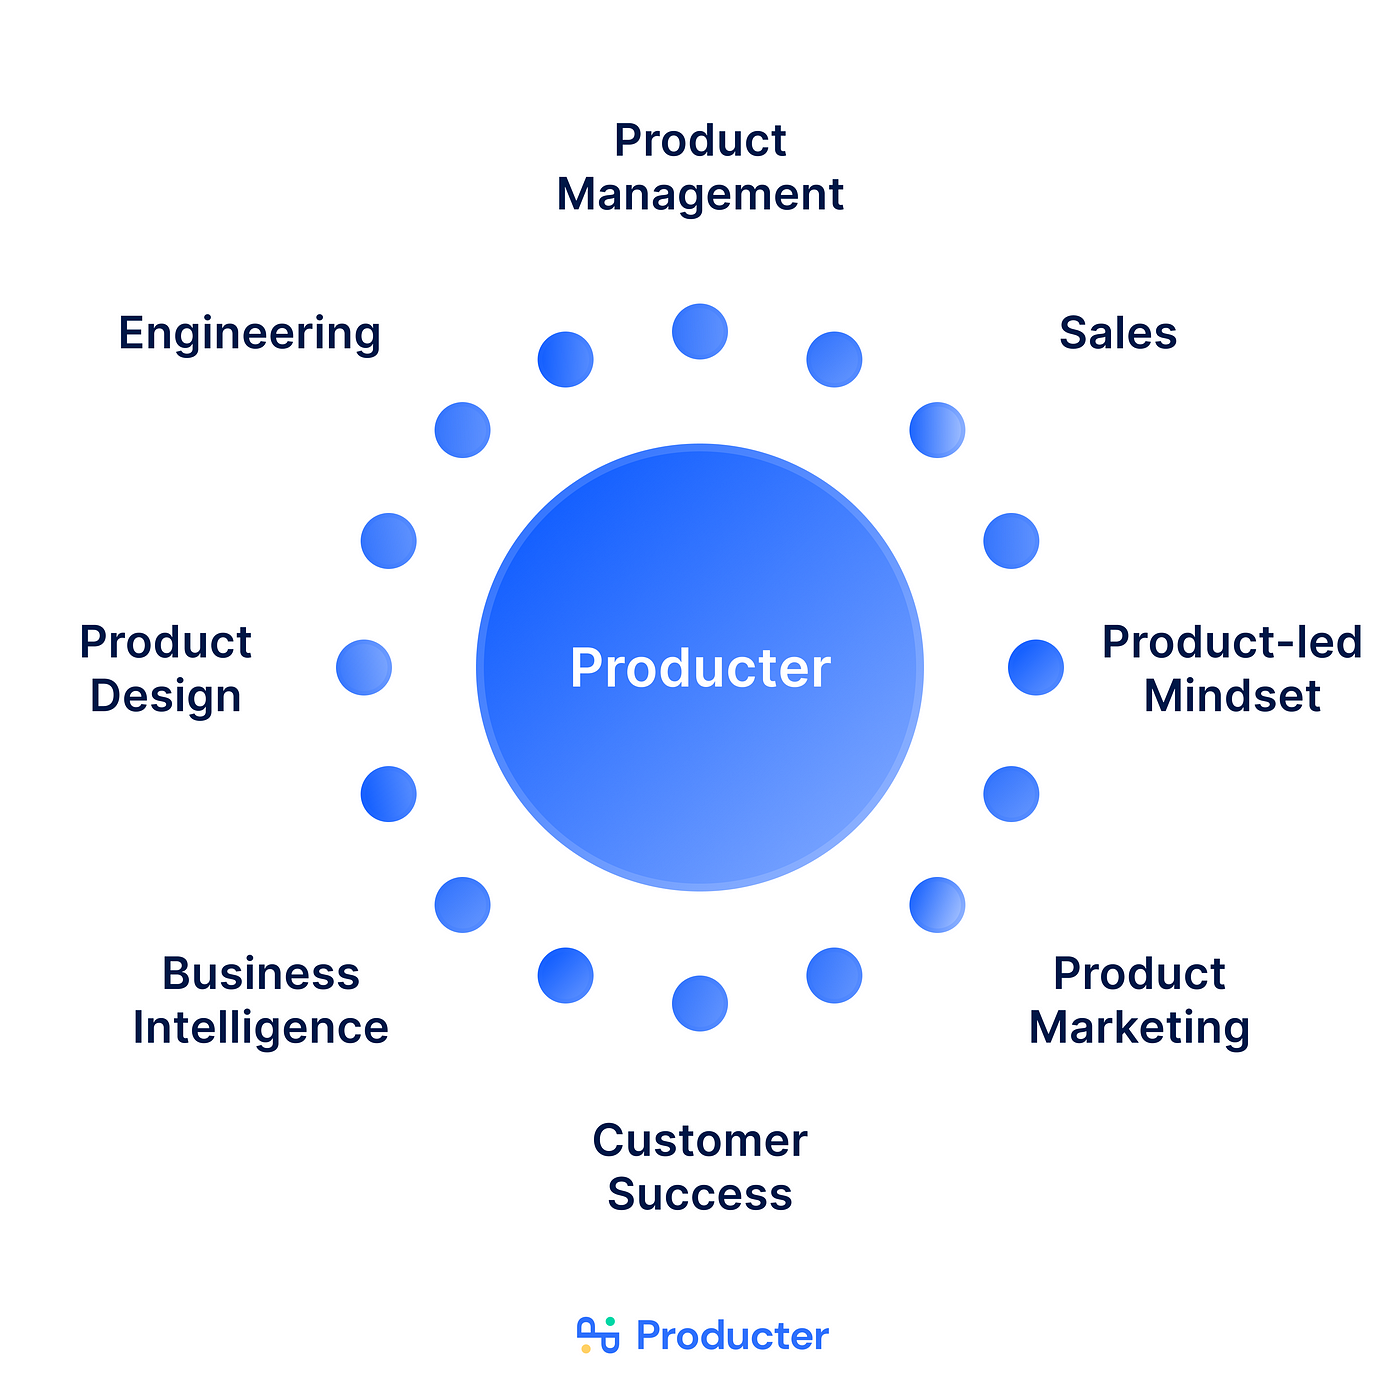 What Does Product Management Mean For Producters?